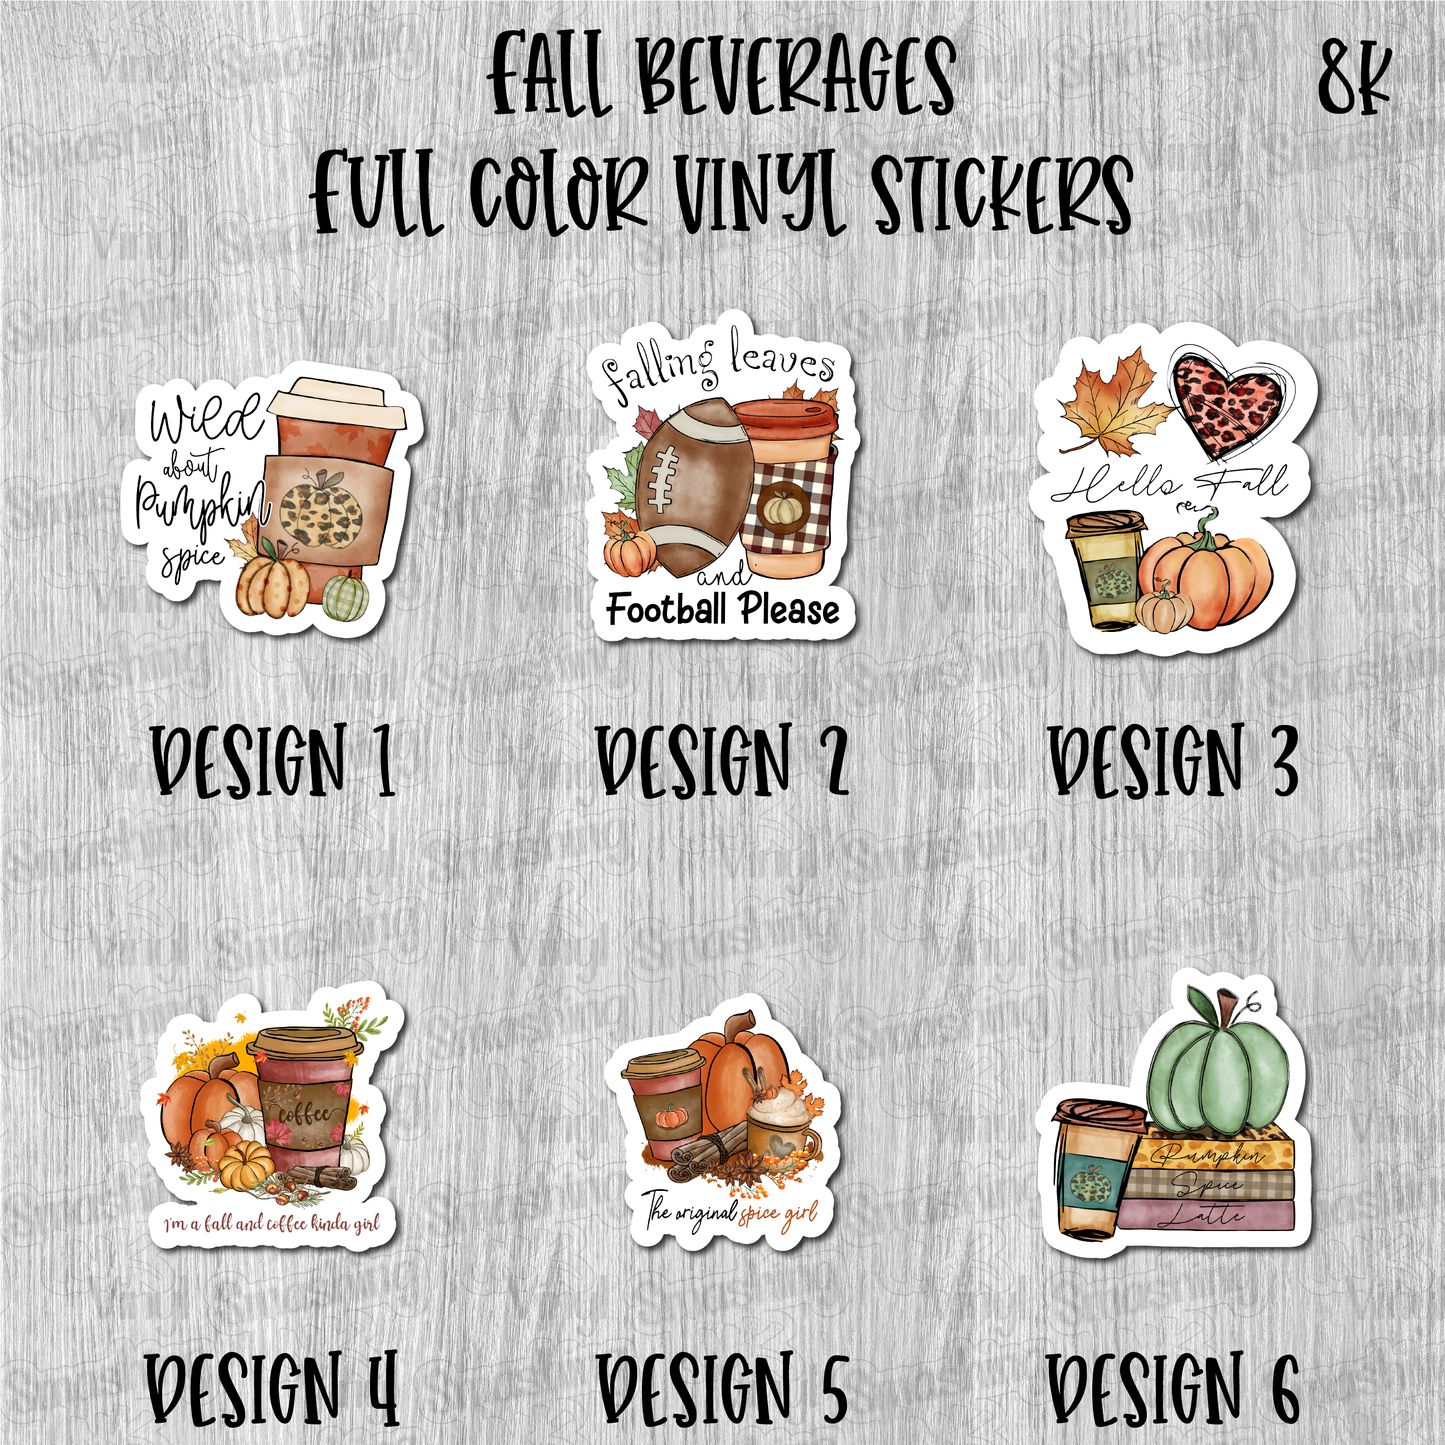 Fall Beverages - Full Color Vinyl Stickers (SHIPS IN 3-7 BUS DAYS)